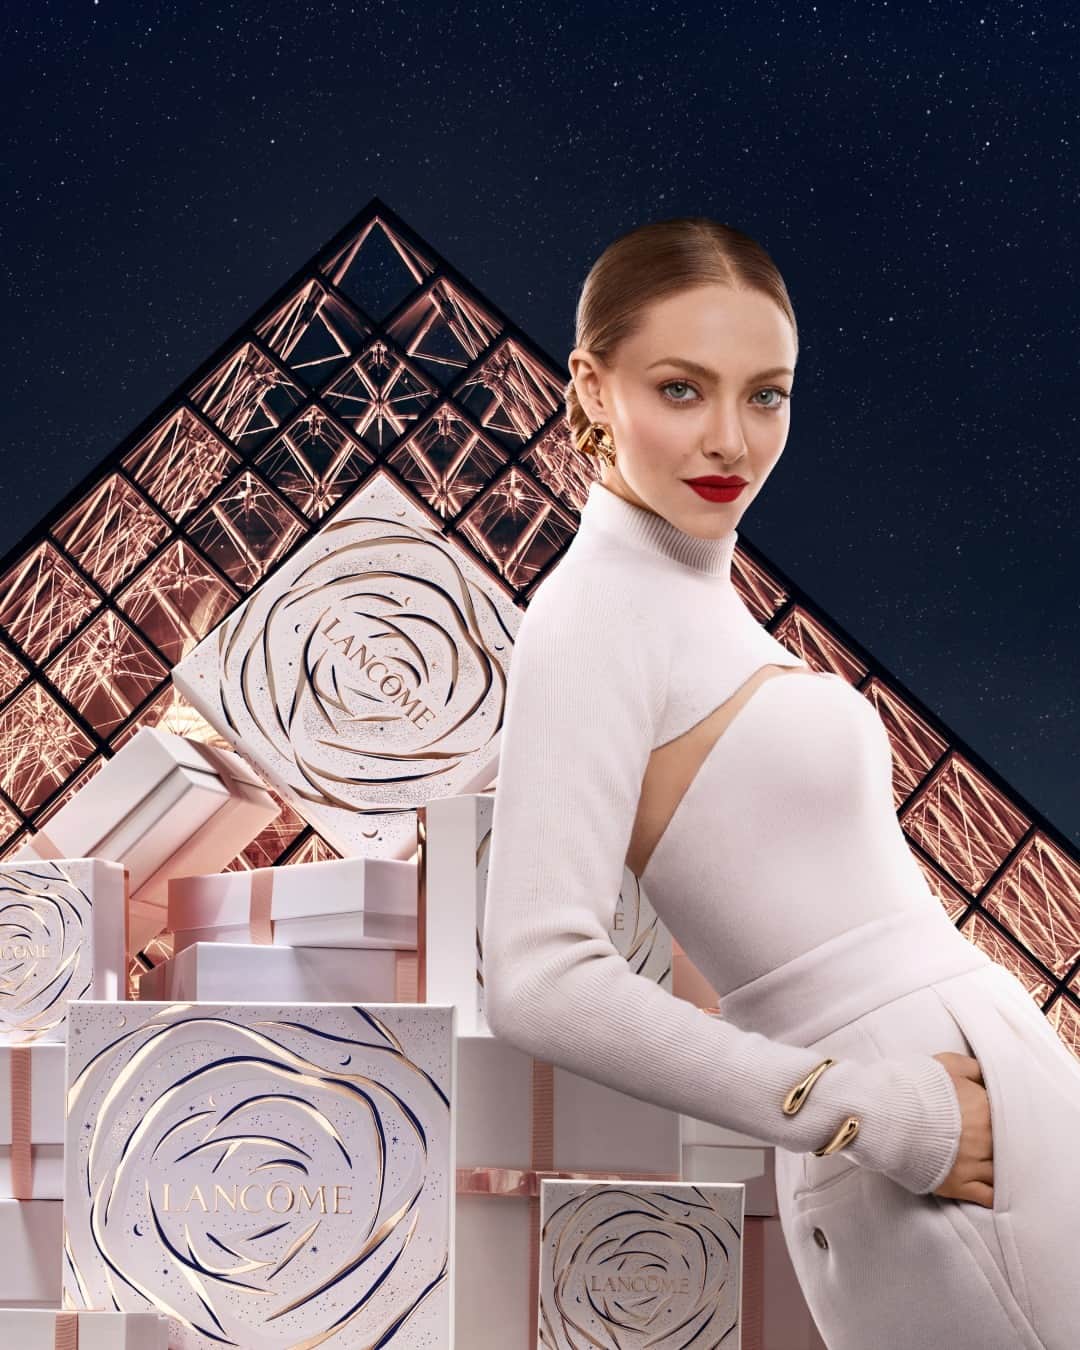 Lancôme Officialのインスタグラム：「Your quest for the extraordinary begins at the foot of a dazzling pyramid of gifts, standing tall before the majestic pyramid of the Louvre, lit up in all its glory. This Holiday season, gift the extraordinary with Lancôme. @mingey  #Lancome #LancomexLouvre #Holiday23」